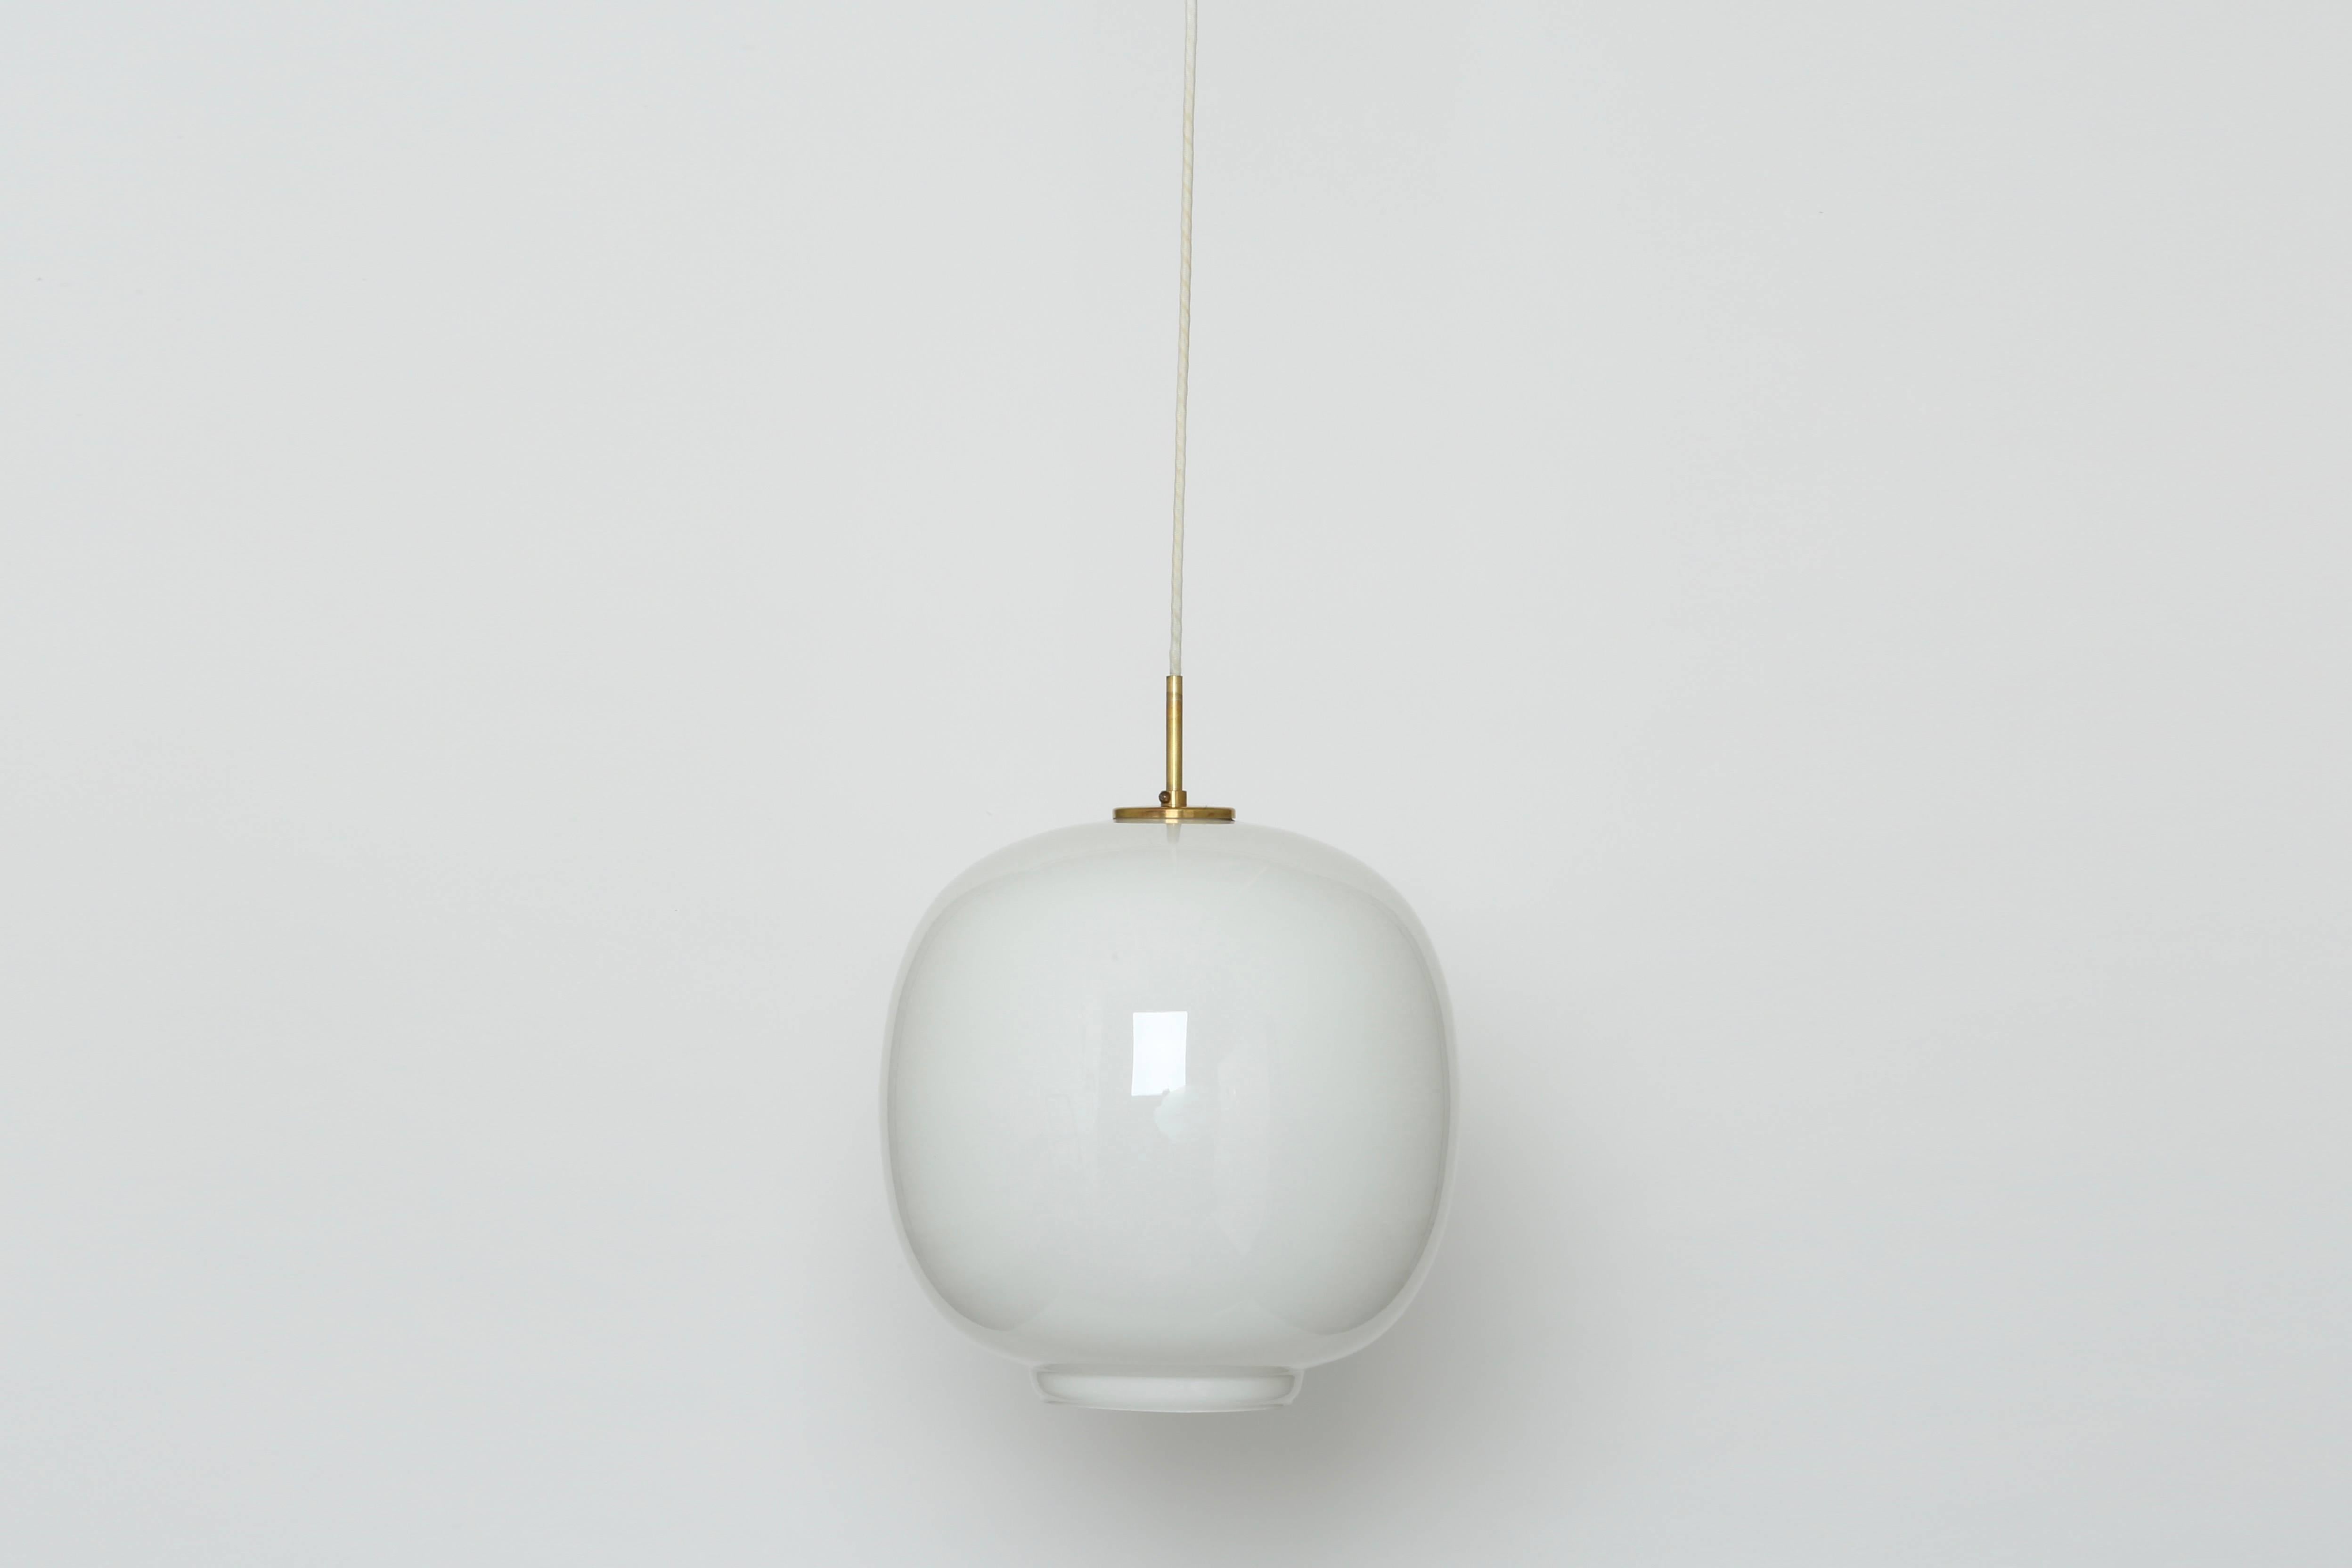 A pair of ceiling pendants by Vilhelm Lauritzen for Louis Poulsen.
These pendants were made in three different sizes. 
This is the largest size with 14.75 inches in diameter.
Danish architect Vilhelm Lauritzen designed these pendants for Radio